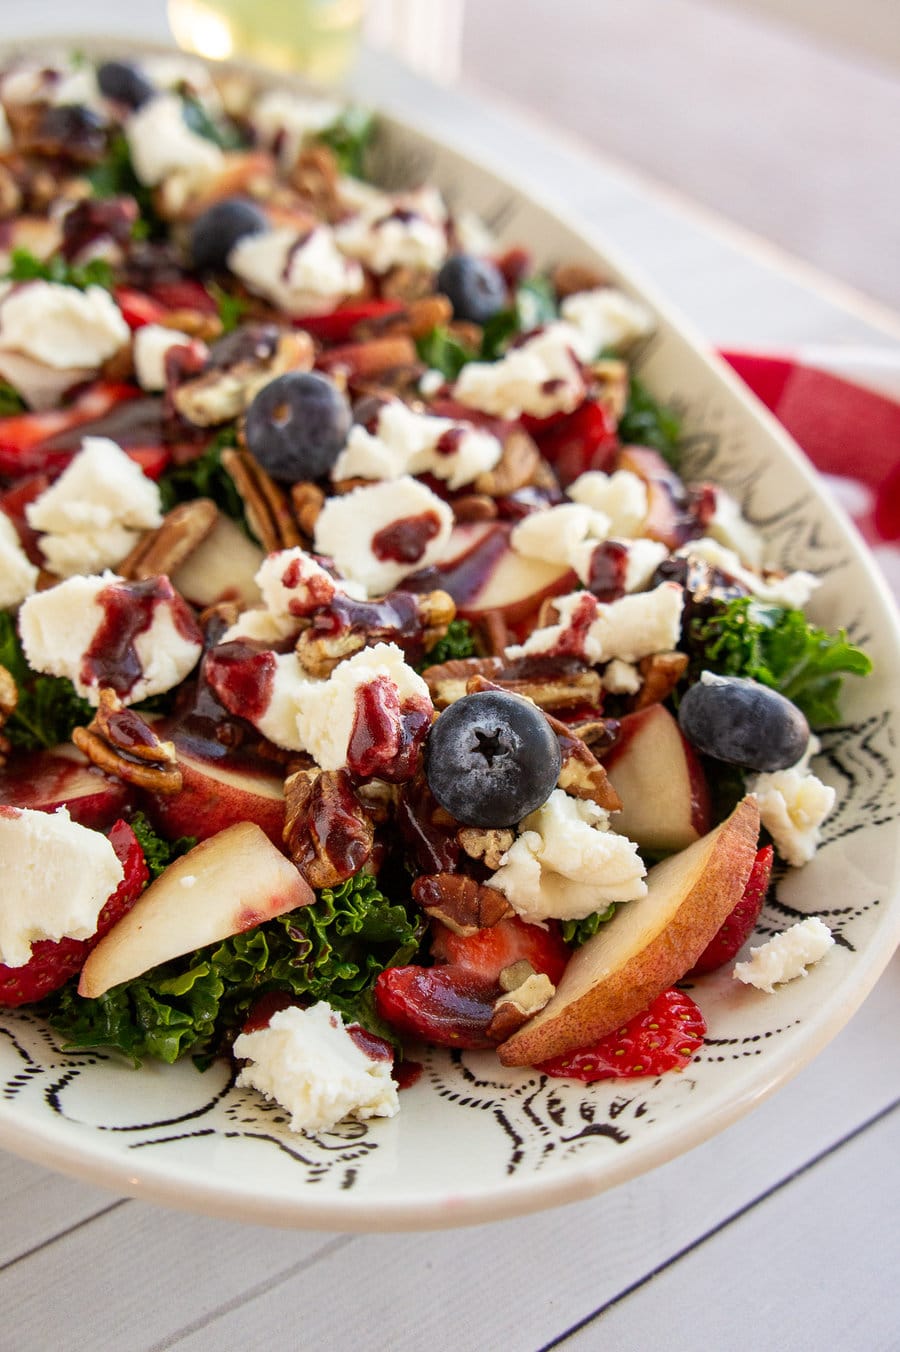 kale salad with berries, peaches, and cheese.